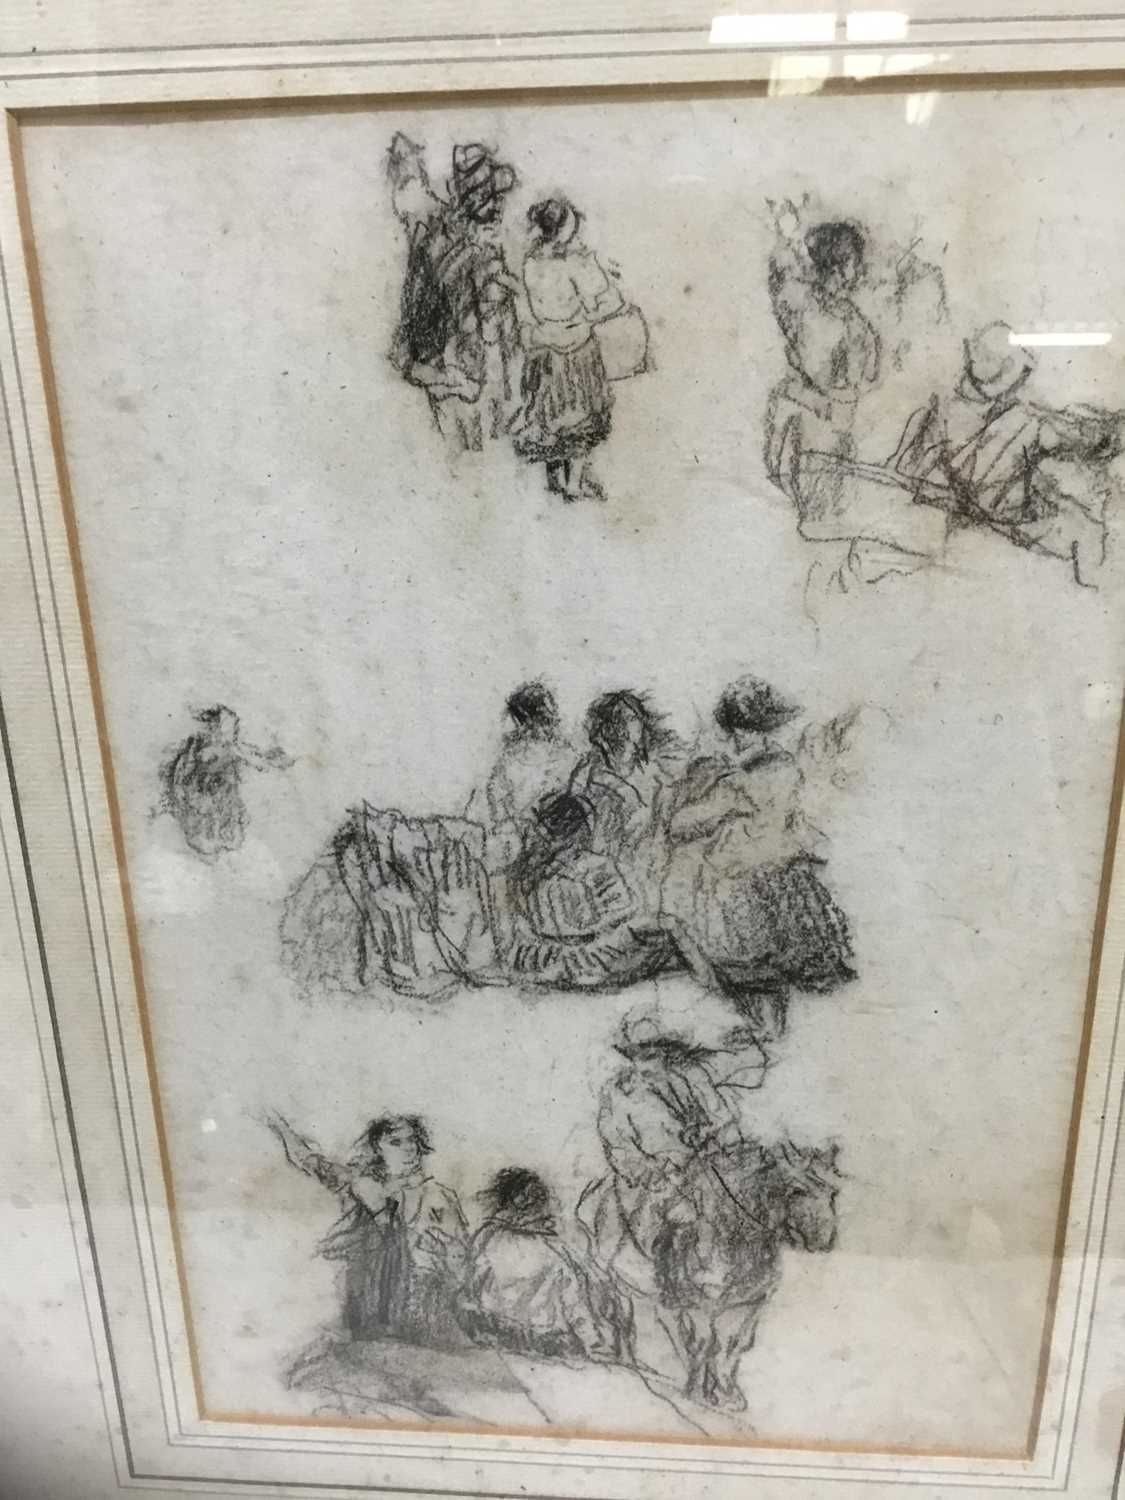 Attributed to David Cox (1785-1859) charcoal sketch, Figures